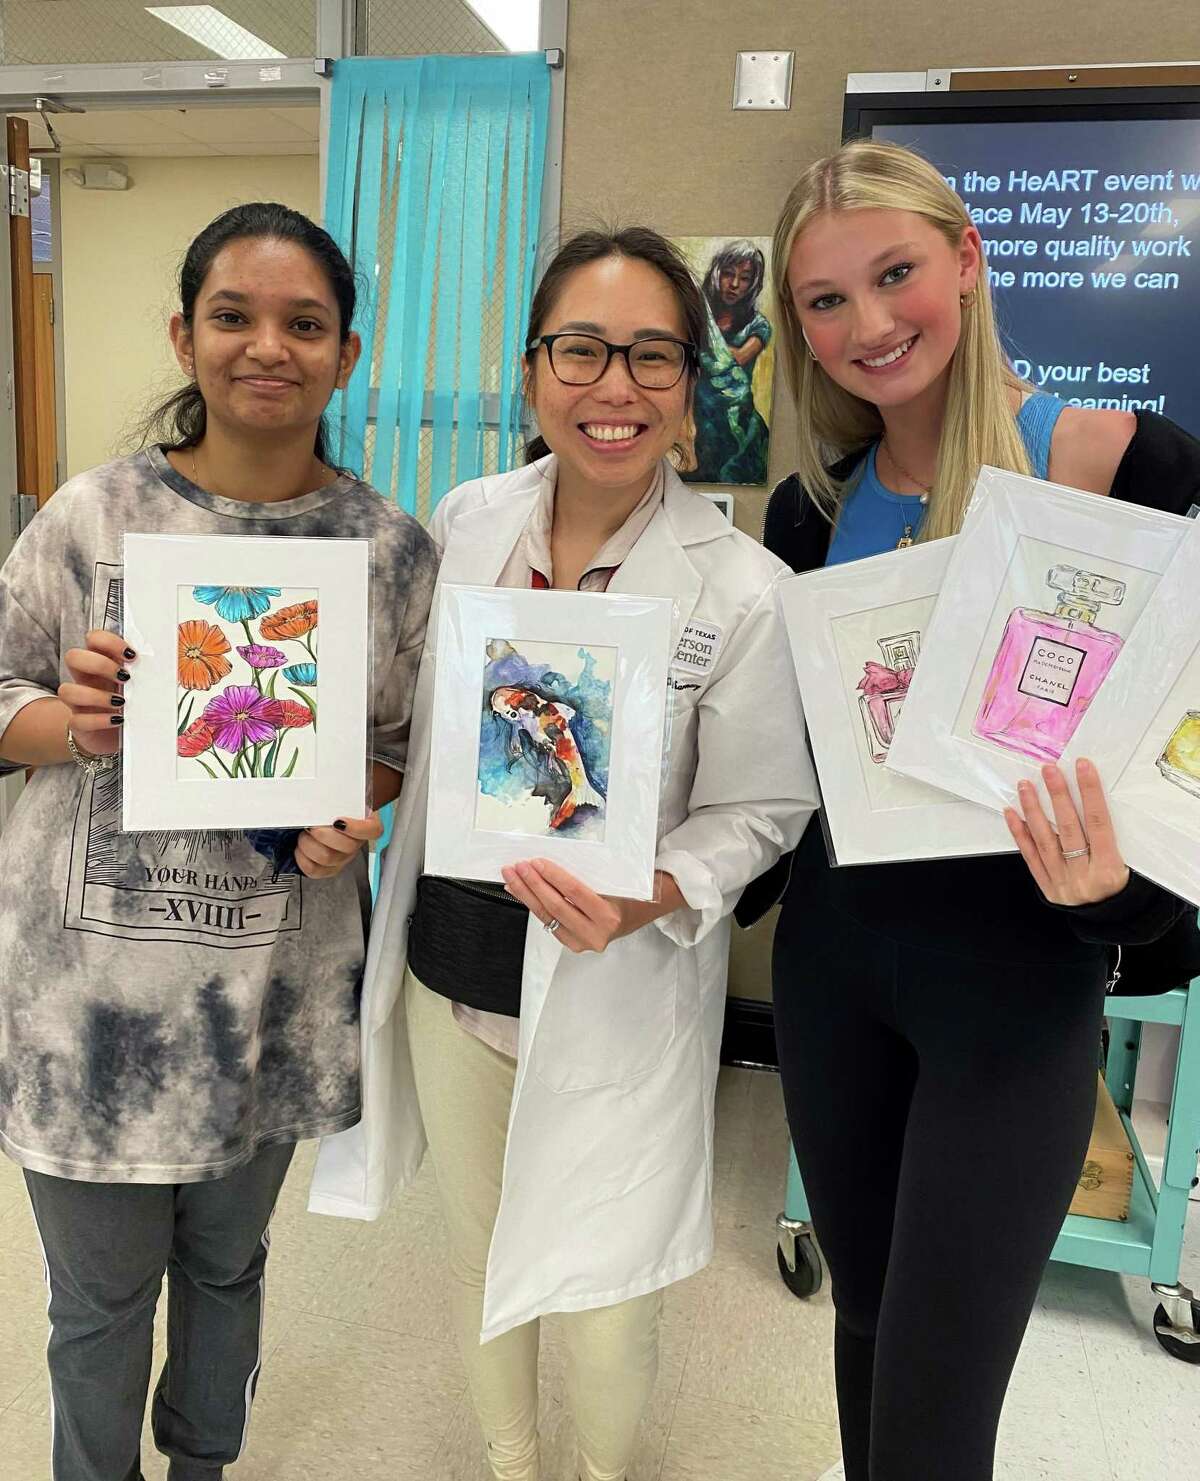 Memorial High School teacher Annie Huynh and two students show off their artworks from the “from the heART” fundraiser.